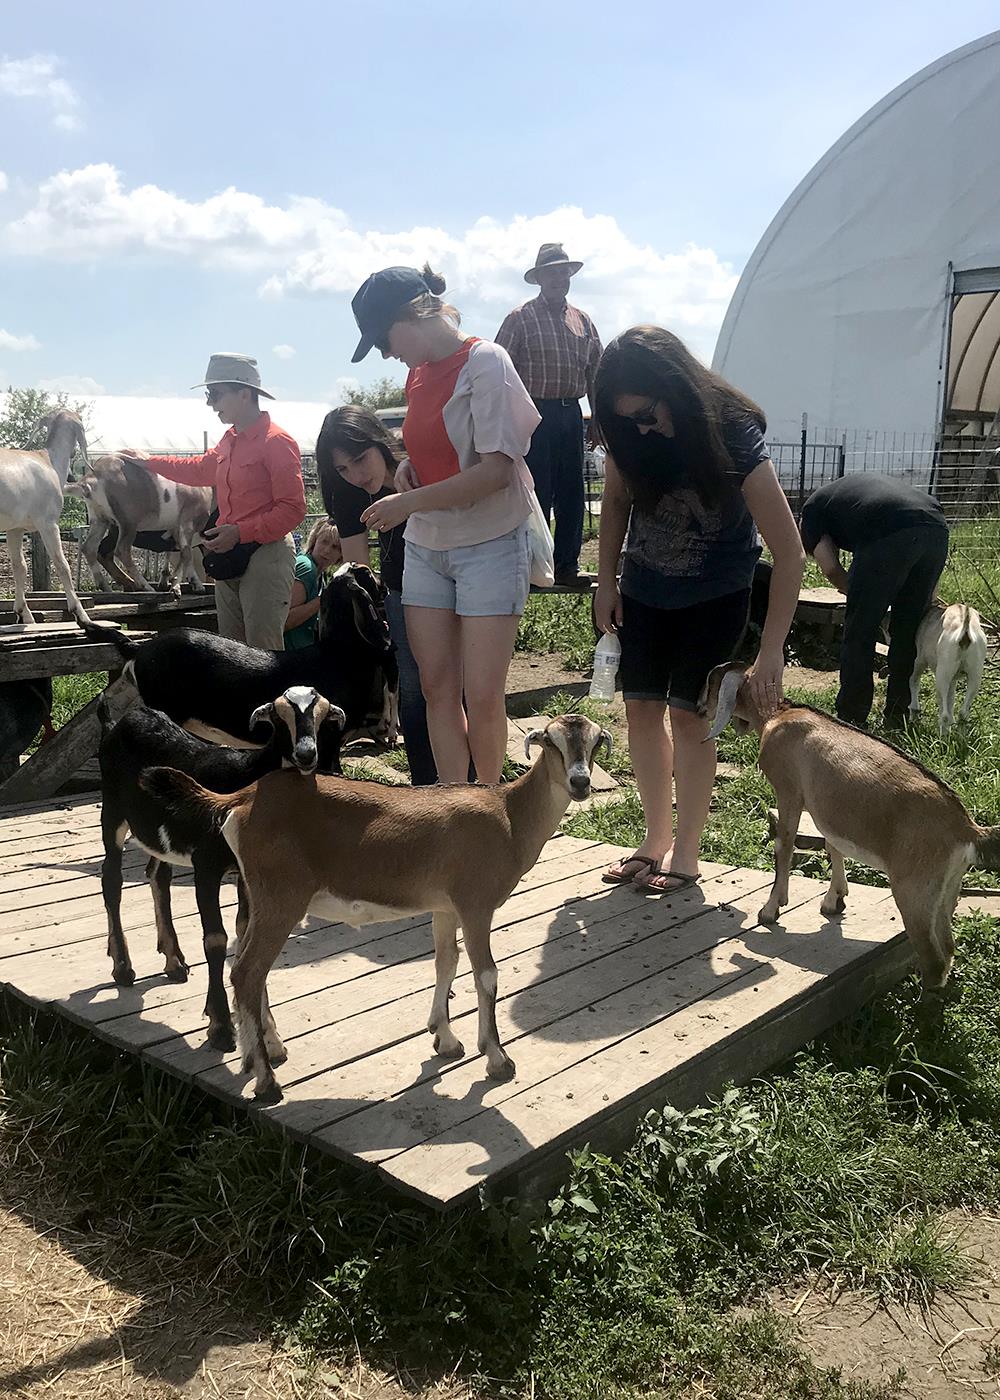 Participants in the Human-Animal Studies Summer Institute visited Prairie Fruits Farm in Urbana to discuss small-scale faming. (Photo courtesy of Jane Desmond)